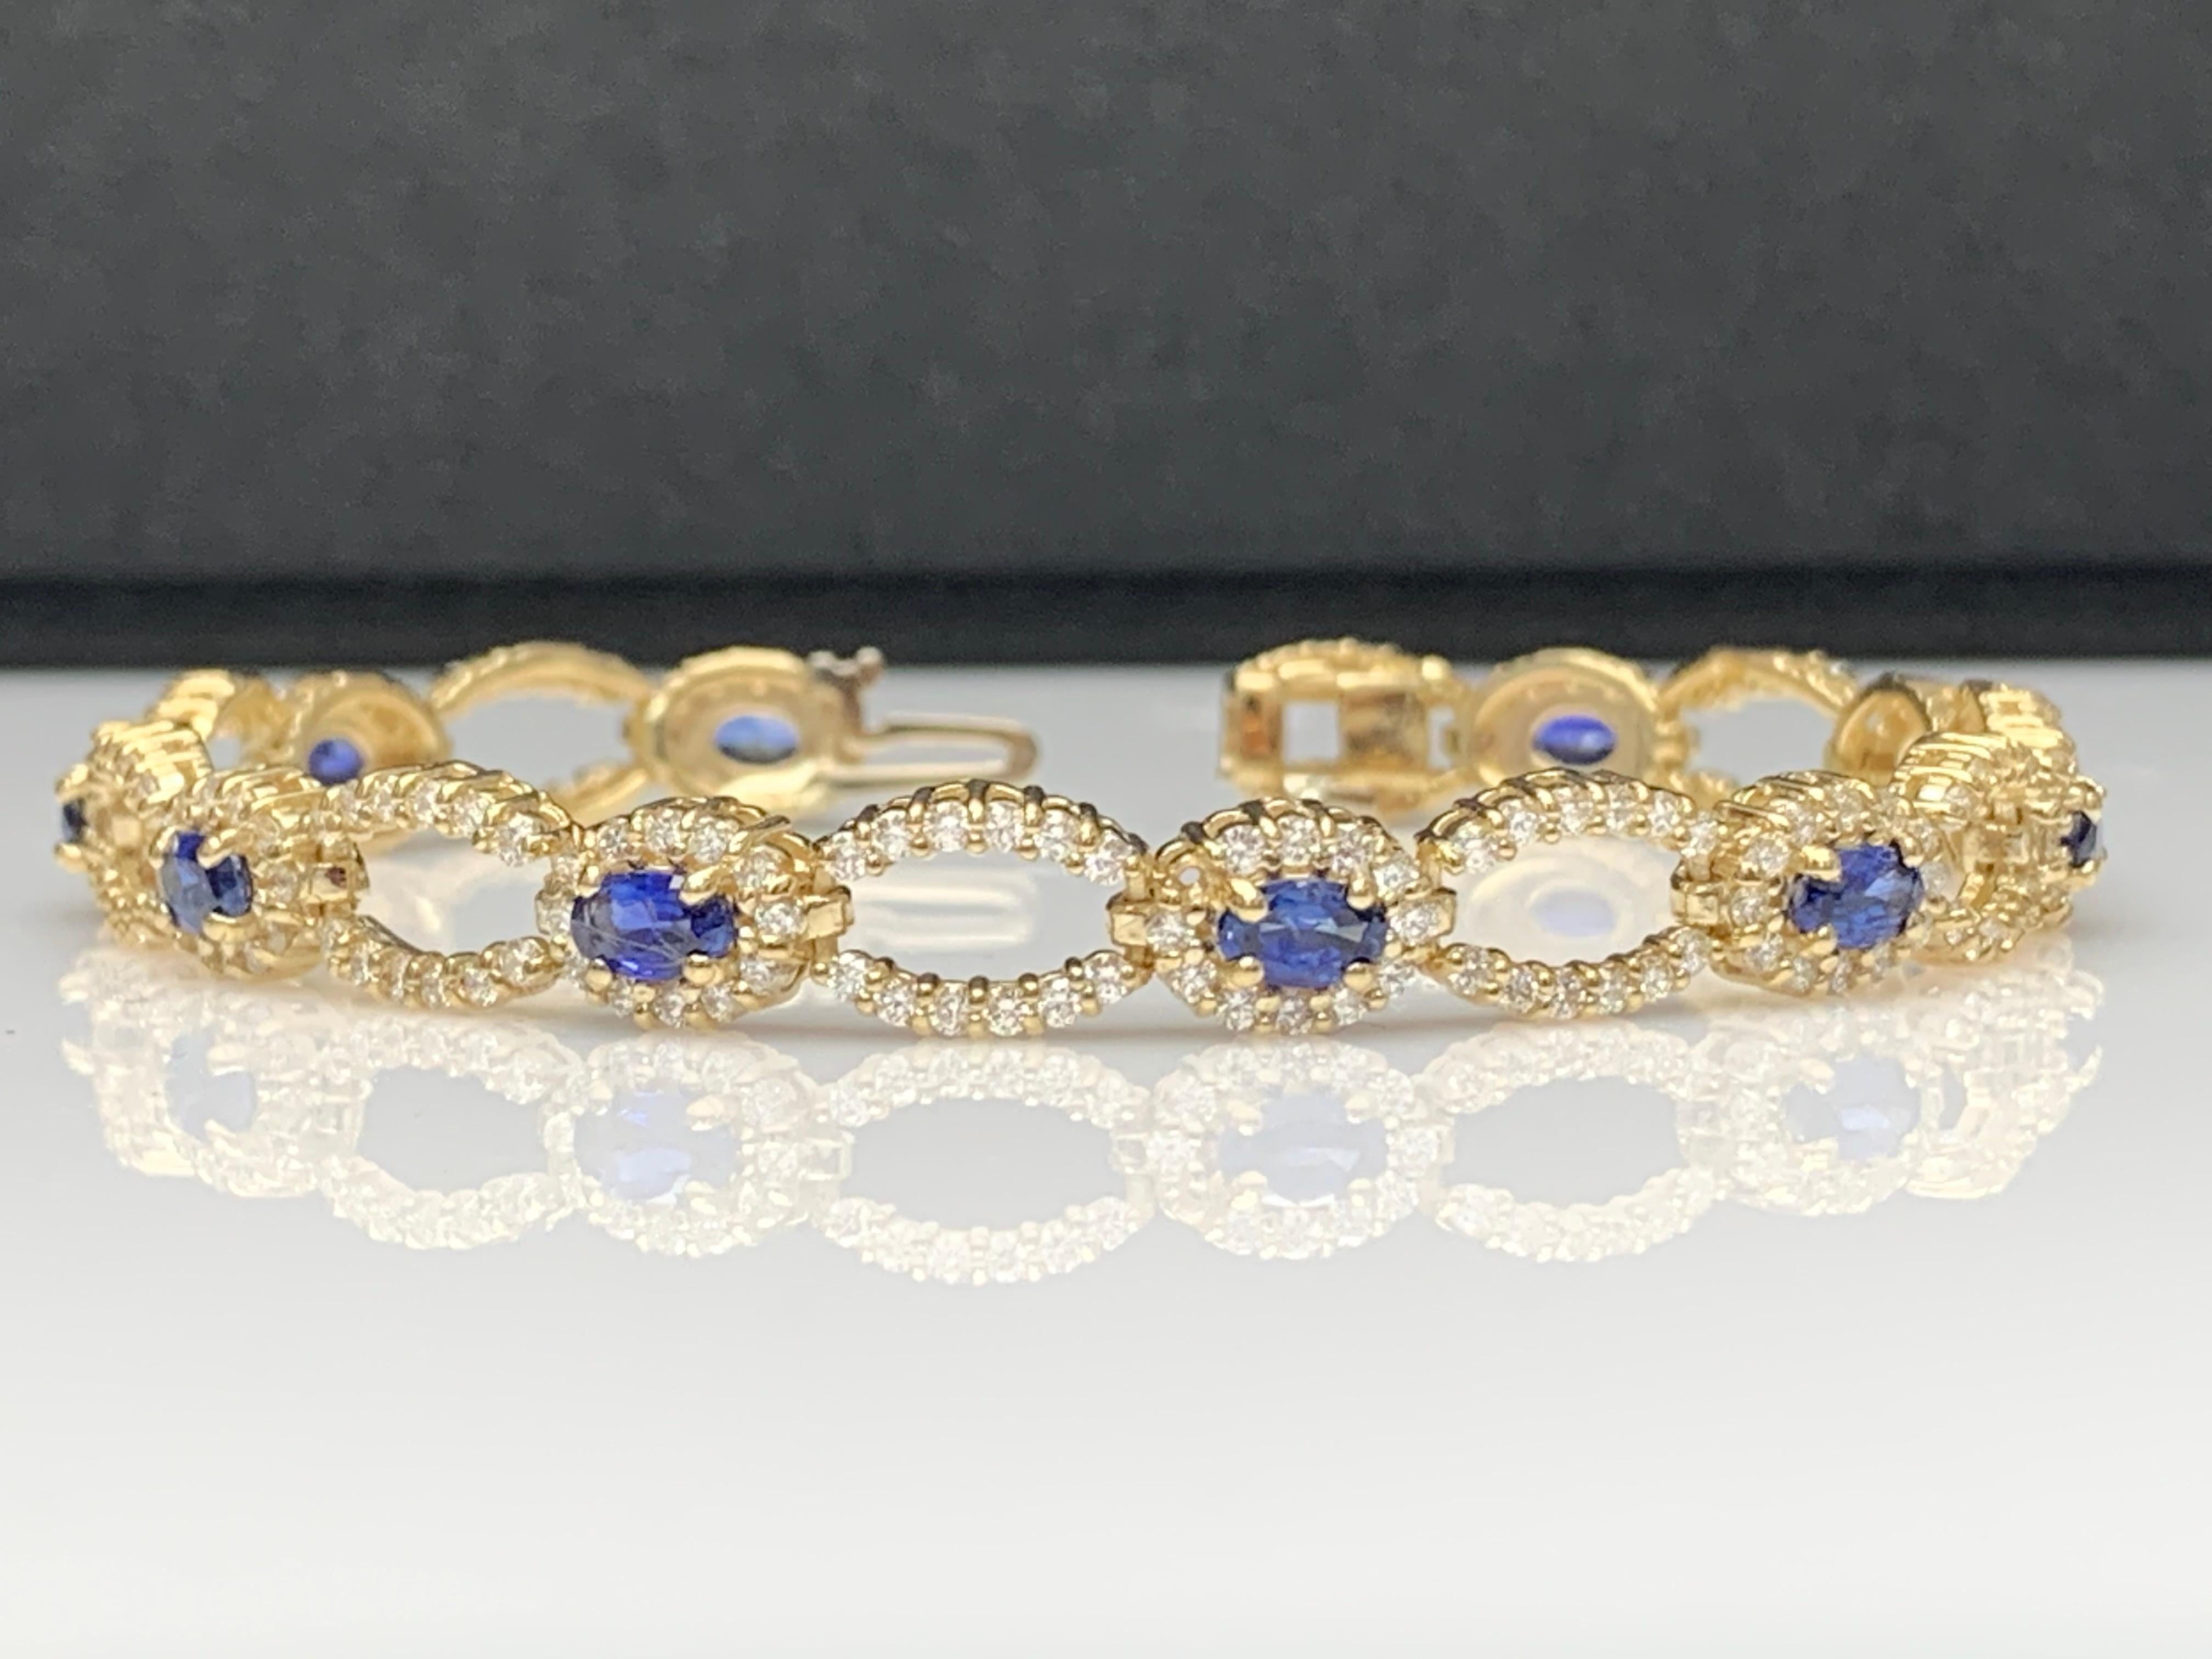 An antique Art Deco bracelet showcasing 10 oval cut blue sapphire weighing 3.60 carats. Surrounding the sapphire is a row of brilliant cut diamonds, set in an intricate open-work design made in 14k yellow gold. 240 Accent Diamonds weigh 3.06 carats